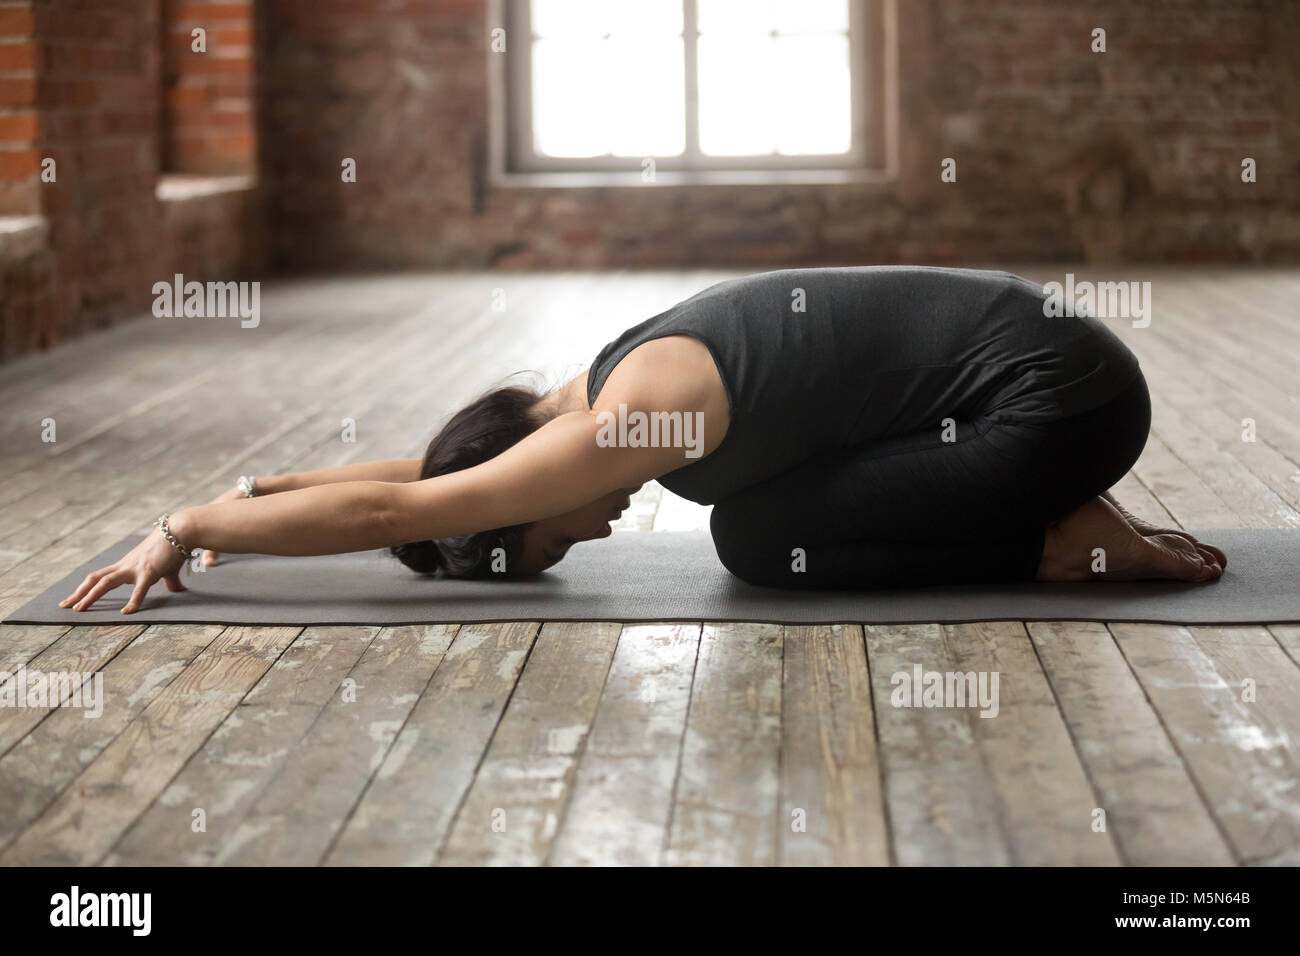 Young sporty woman practicing yoga, doing Balasana exercise, Child pose, working out, wearing sportswear, black pants and top, indoor full length, yog Stock Photo